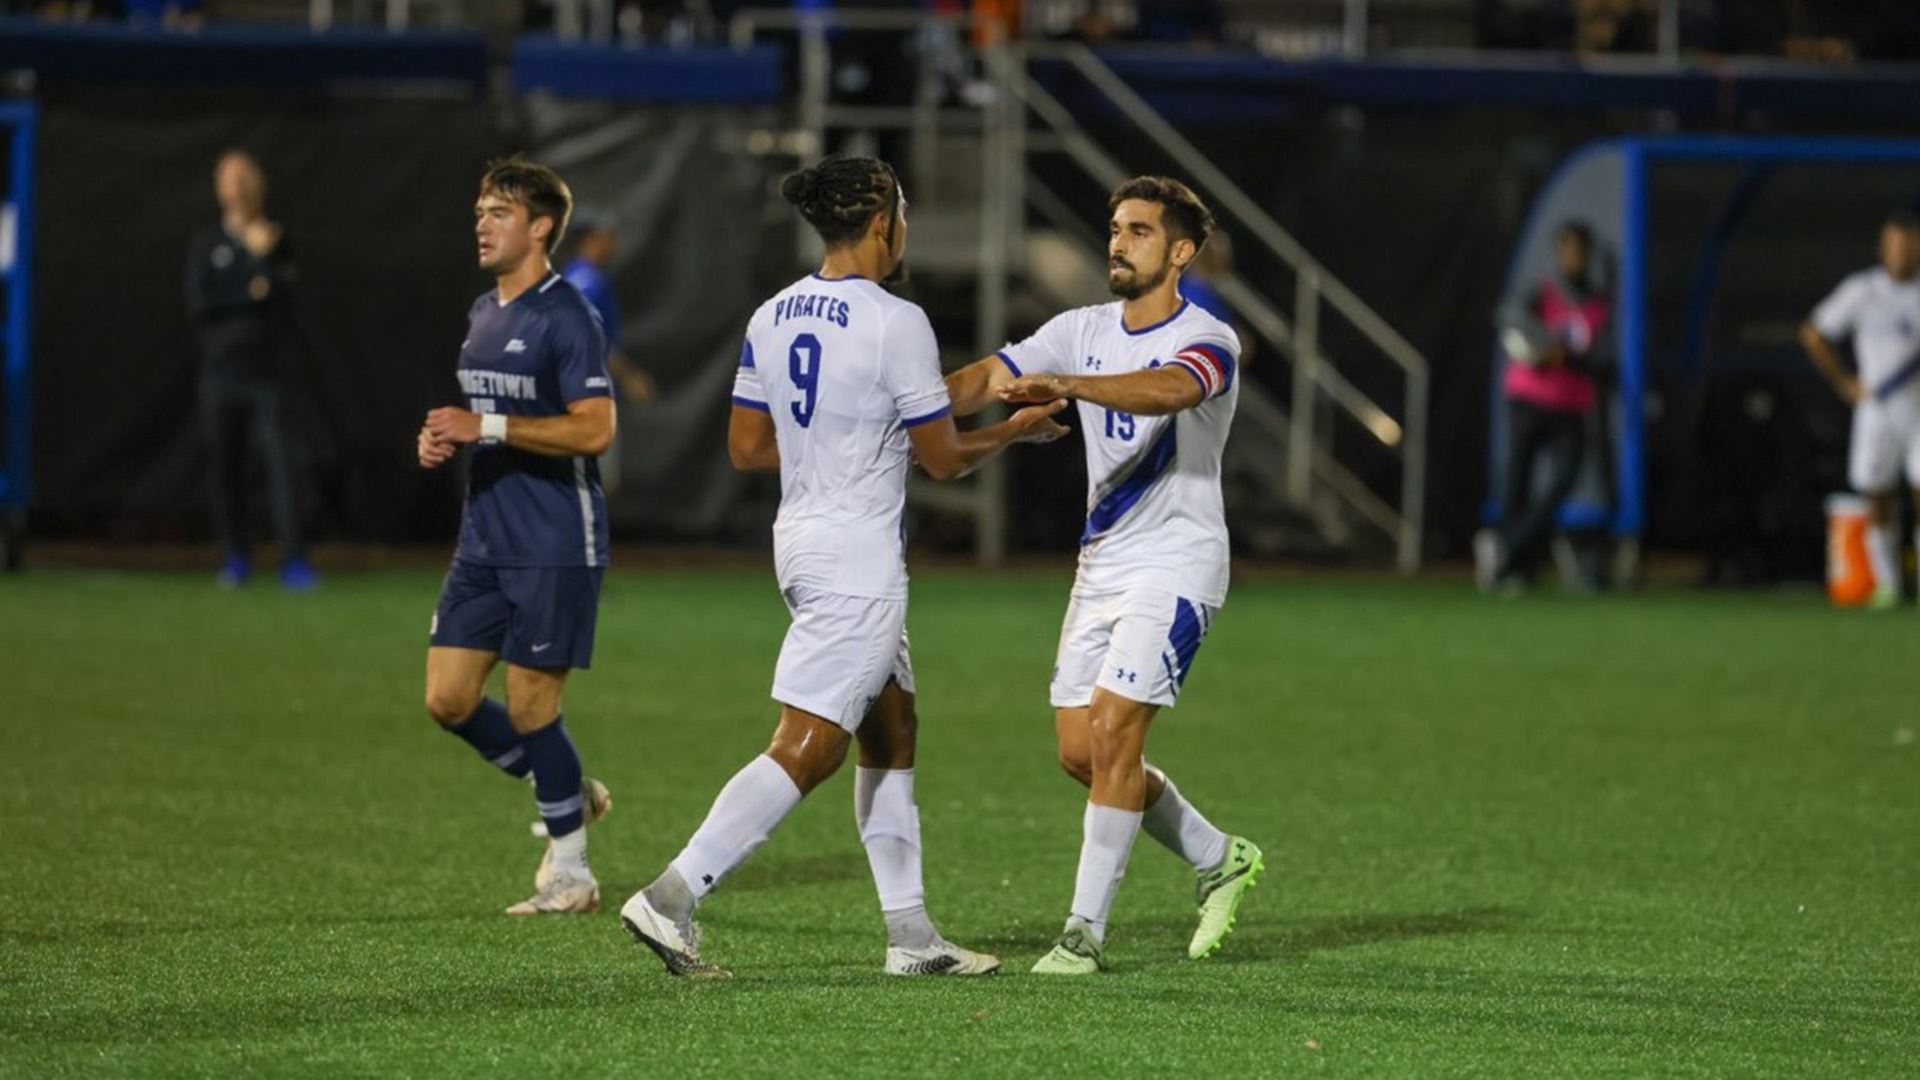 Two Seton Hall men's soccer teammates stand on the field during a play in a game against the No. 1 Georgetown Hoyas.